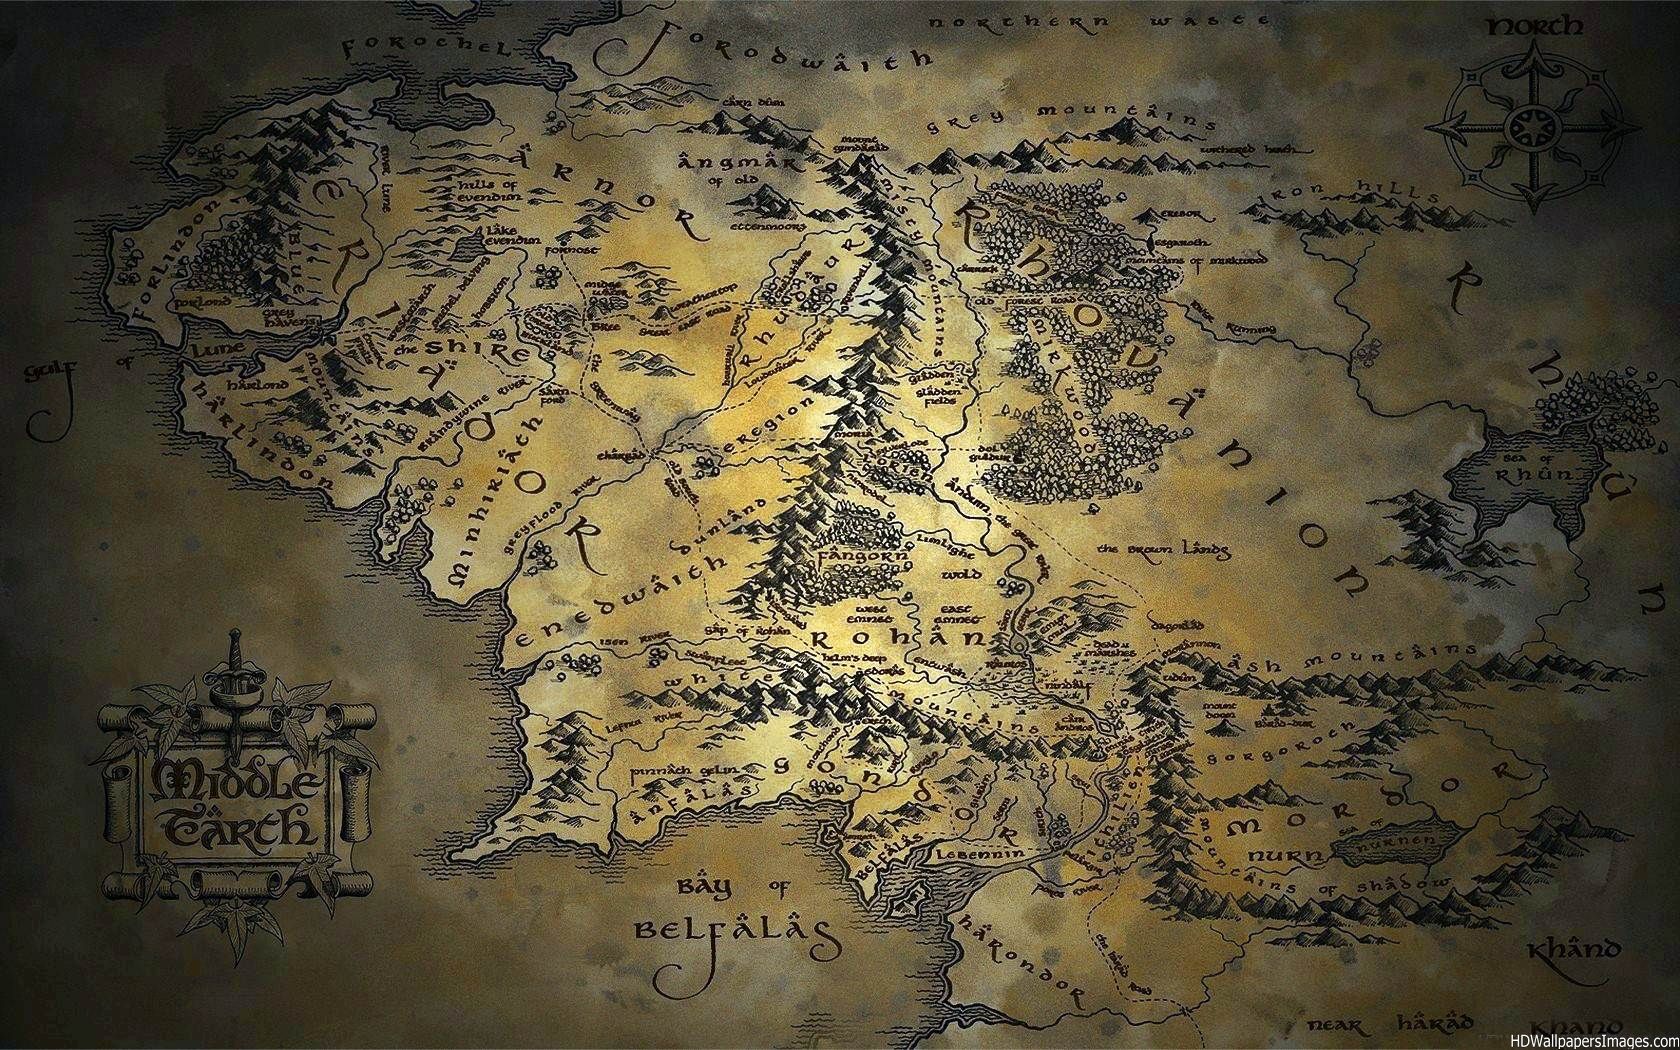 MiddleEarth